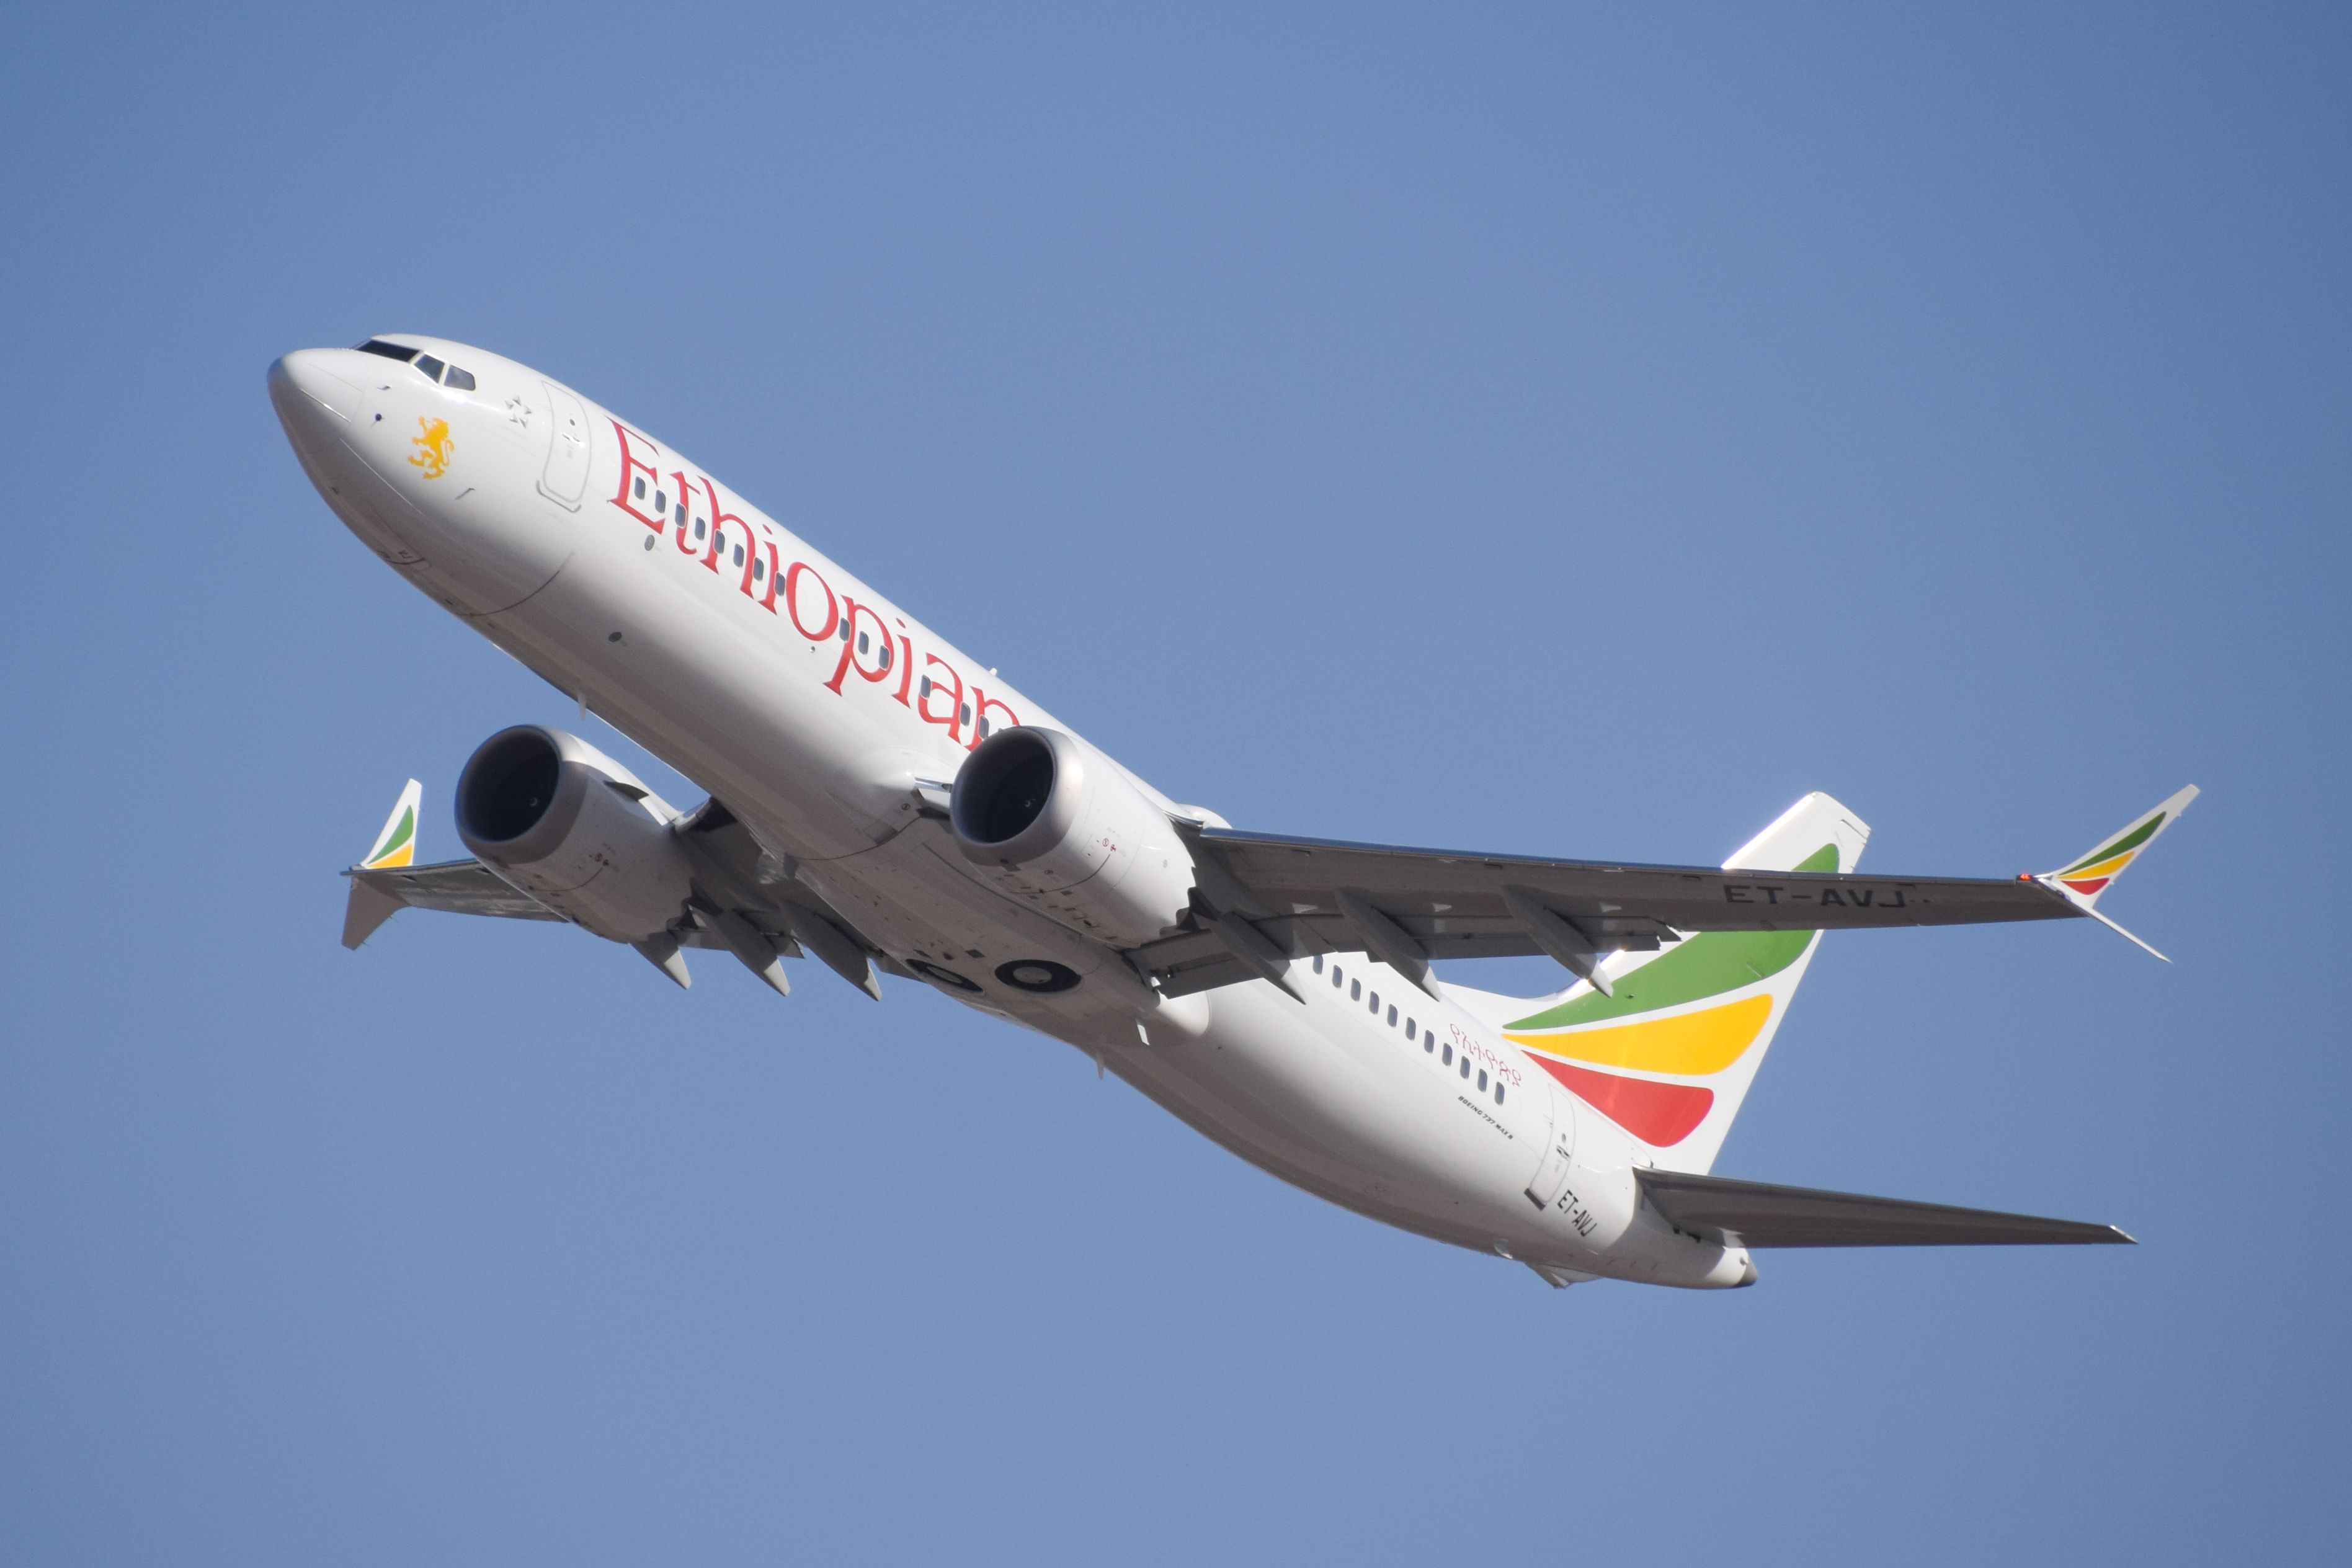 An Ethiopian Airlines aircraft flying in the sky.